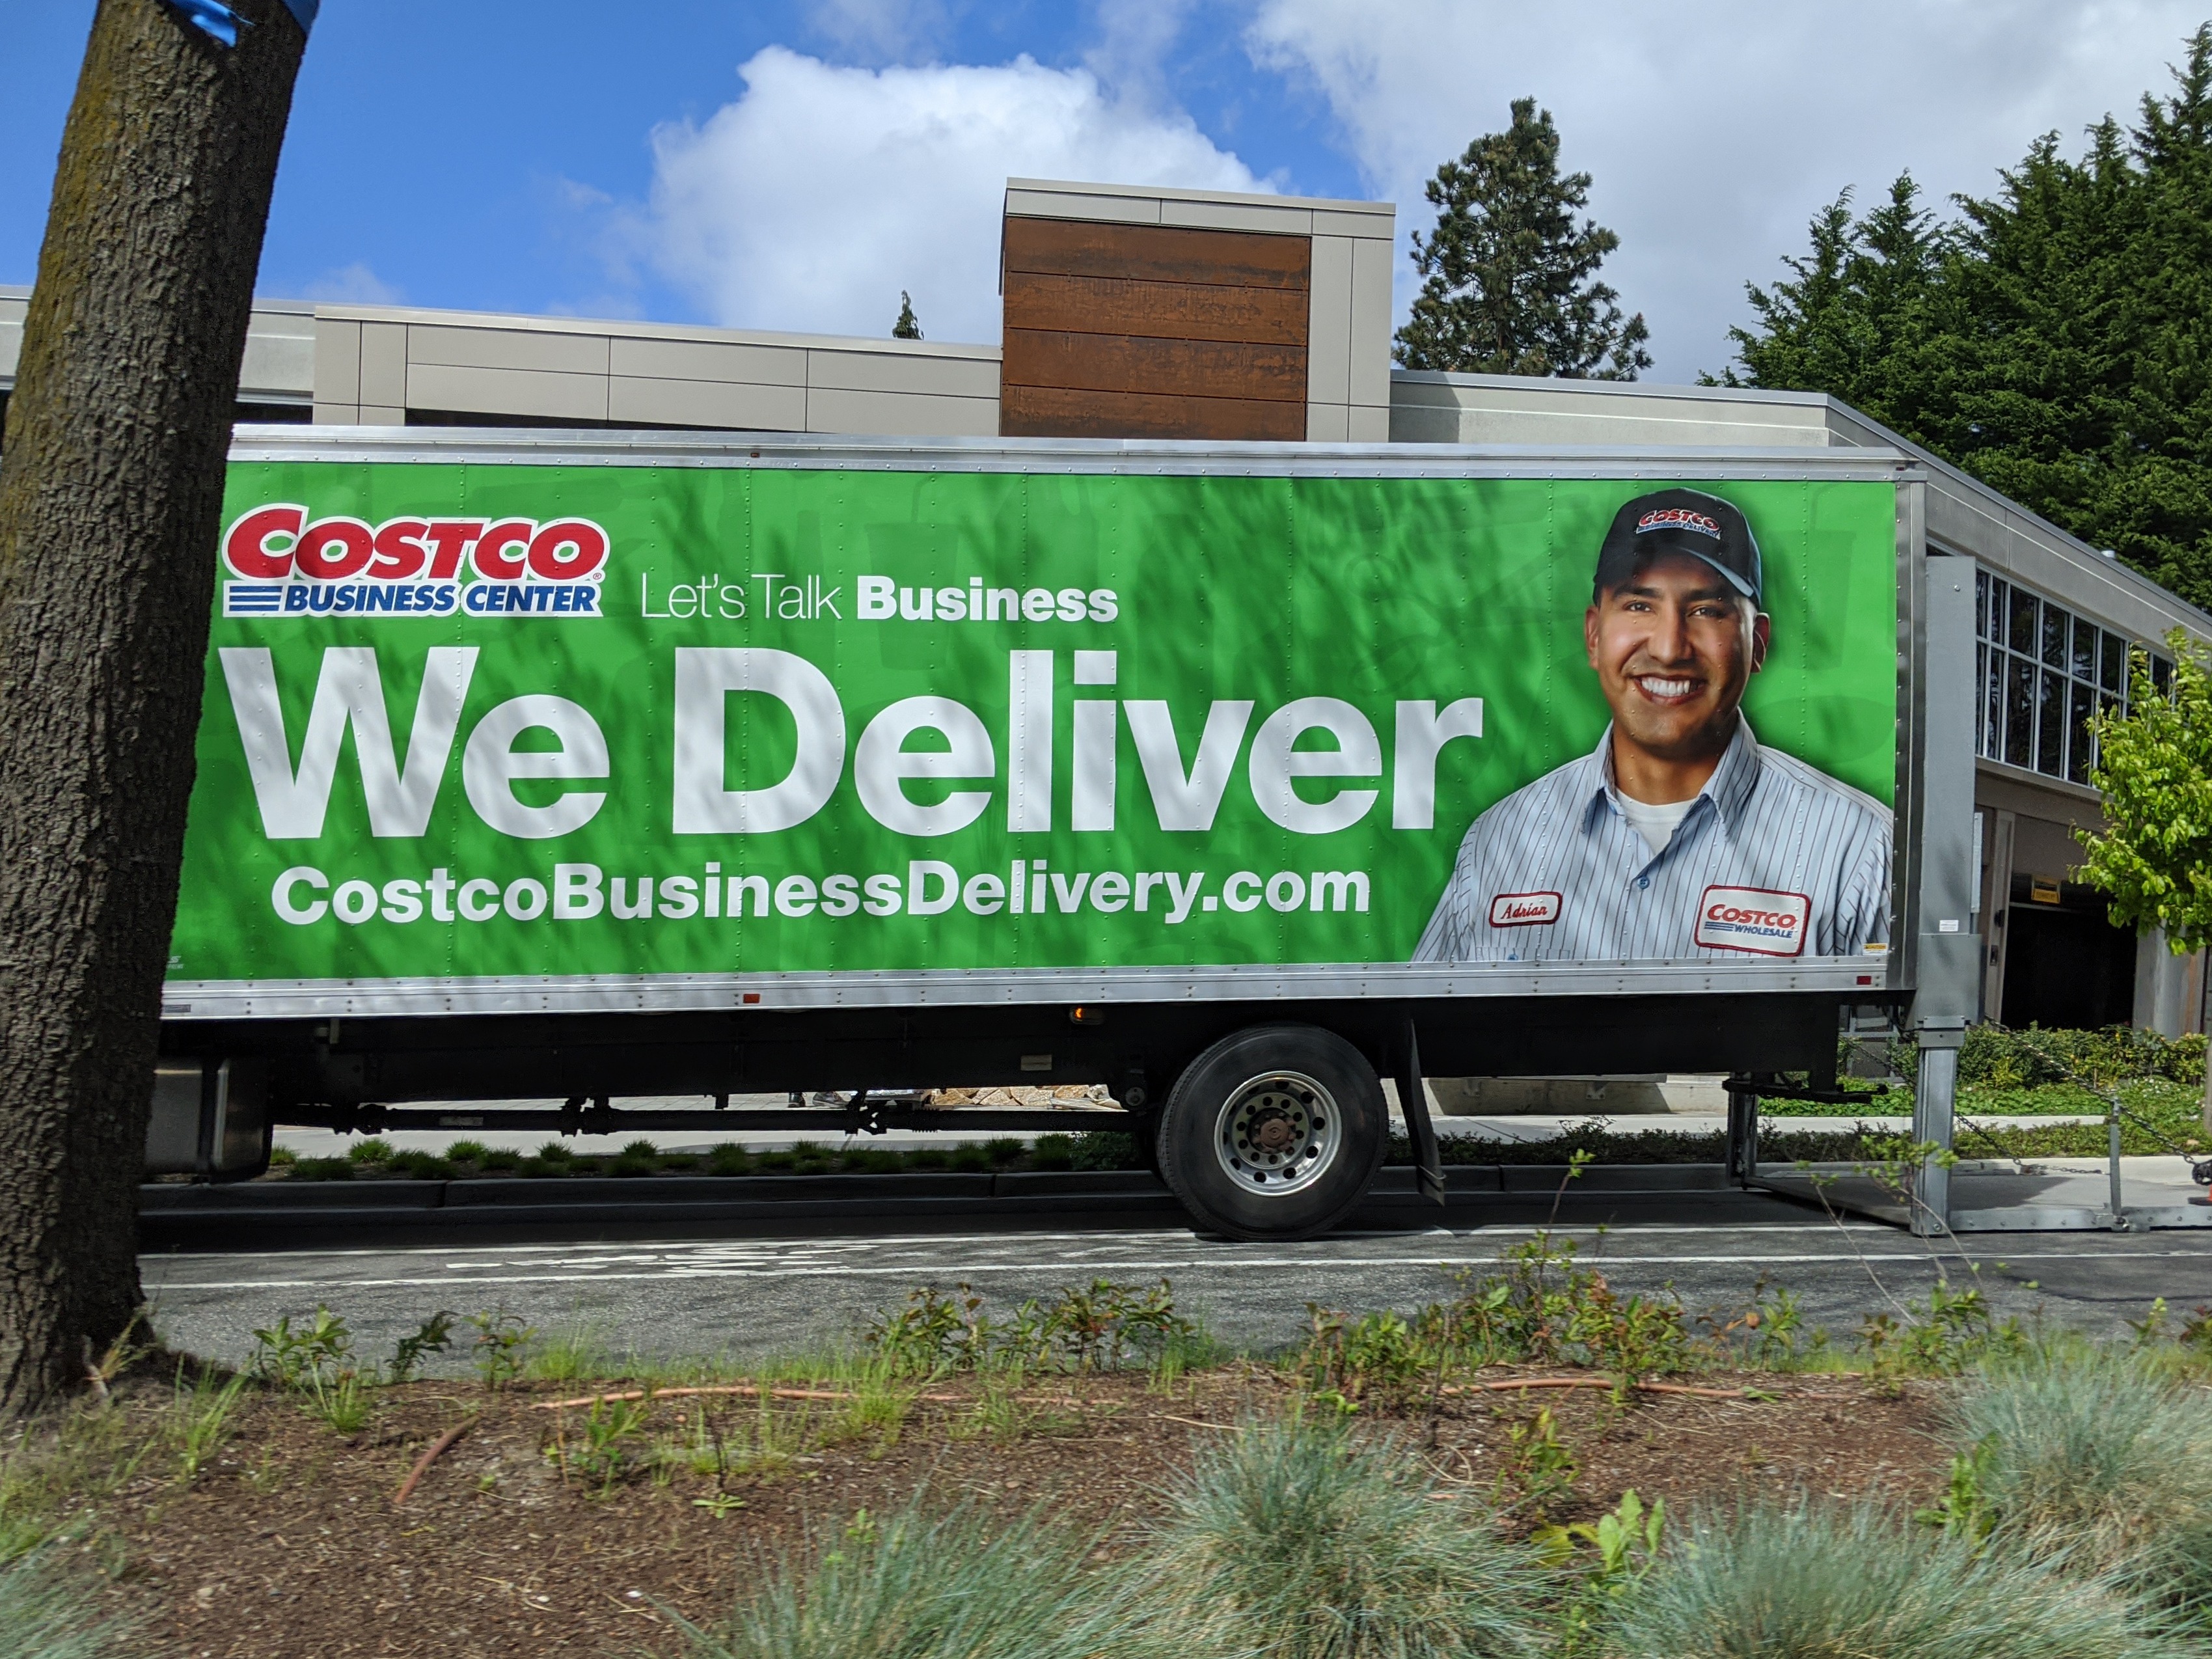 Large truck with the Costco Business Center logo on it